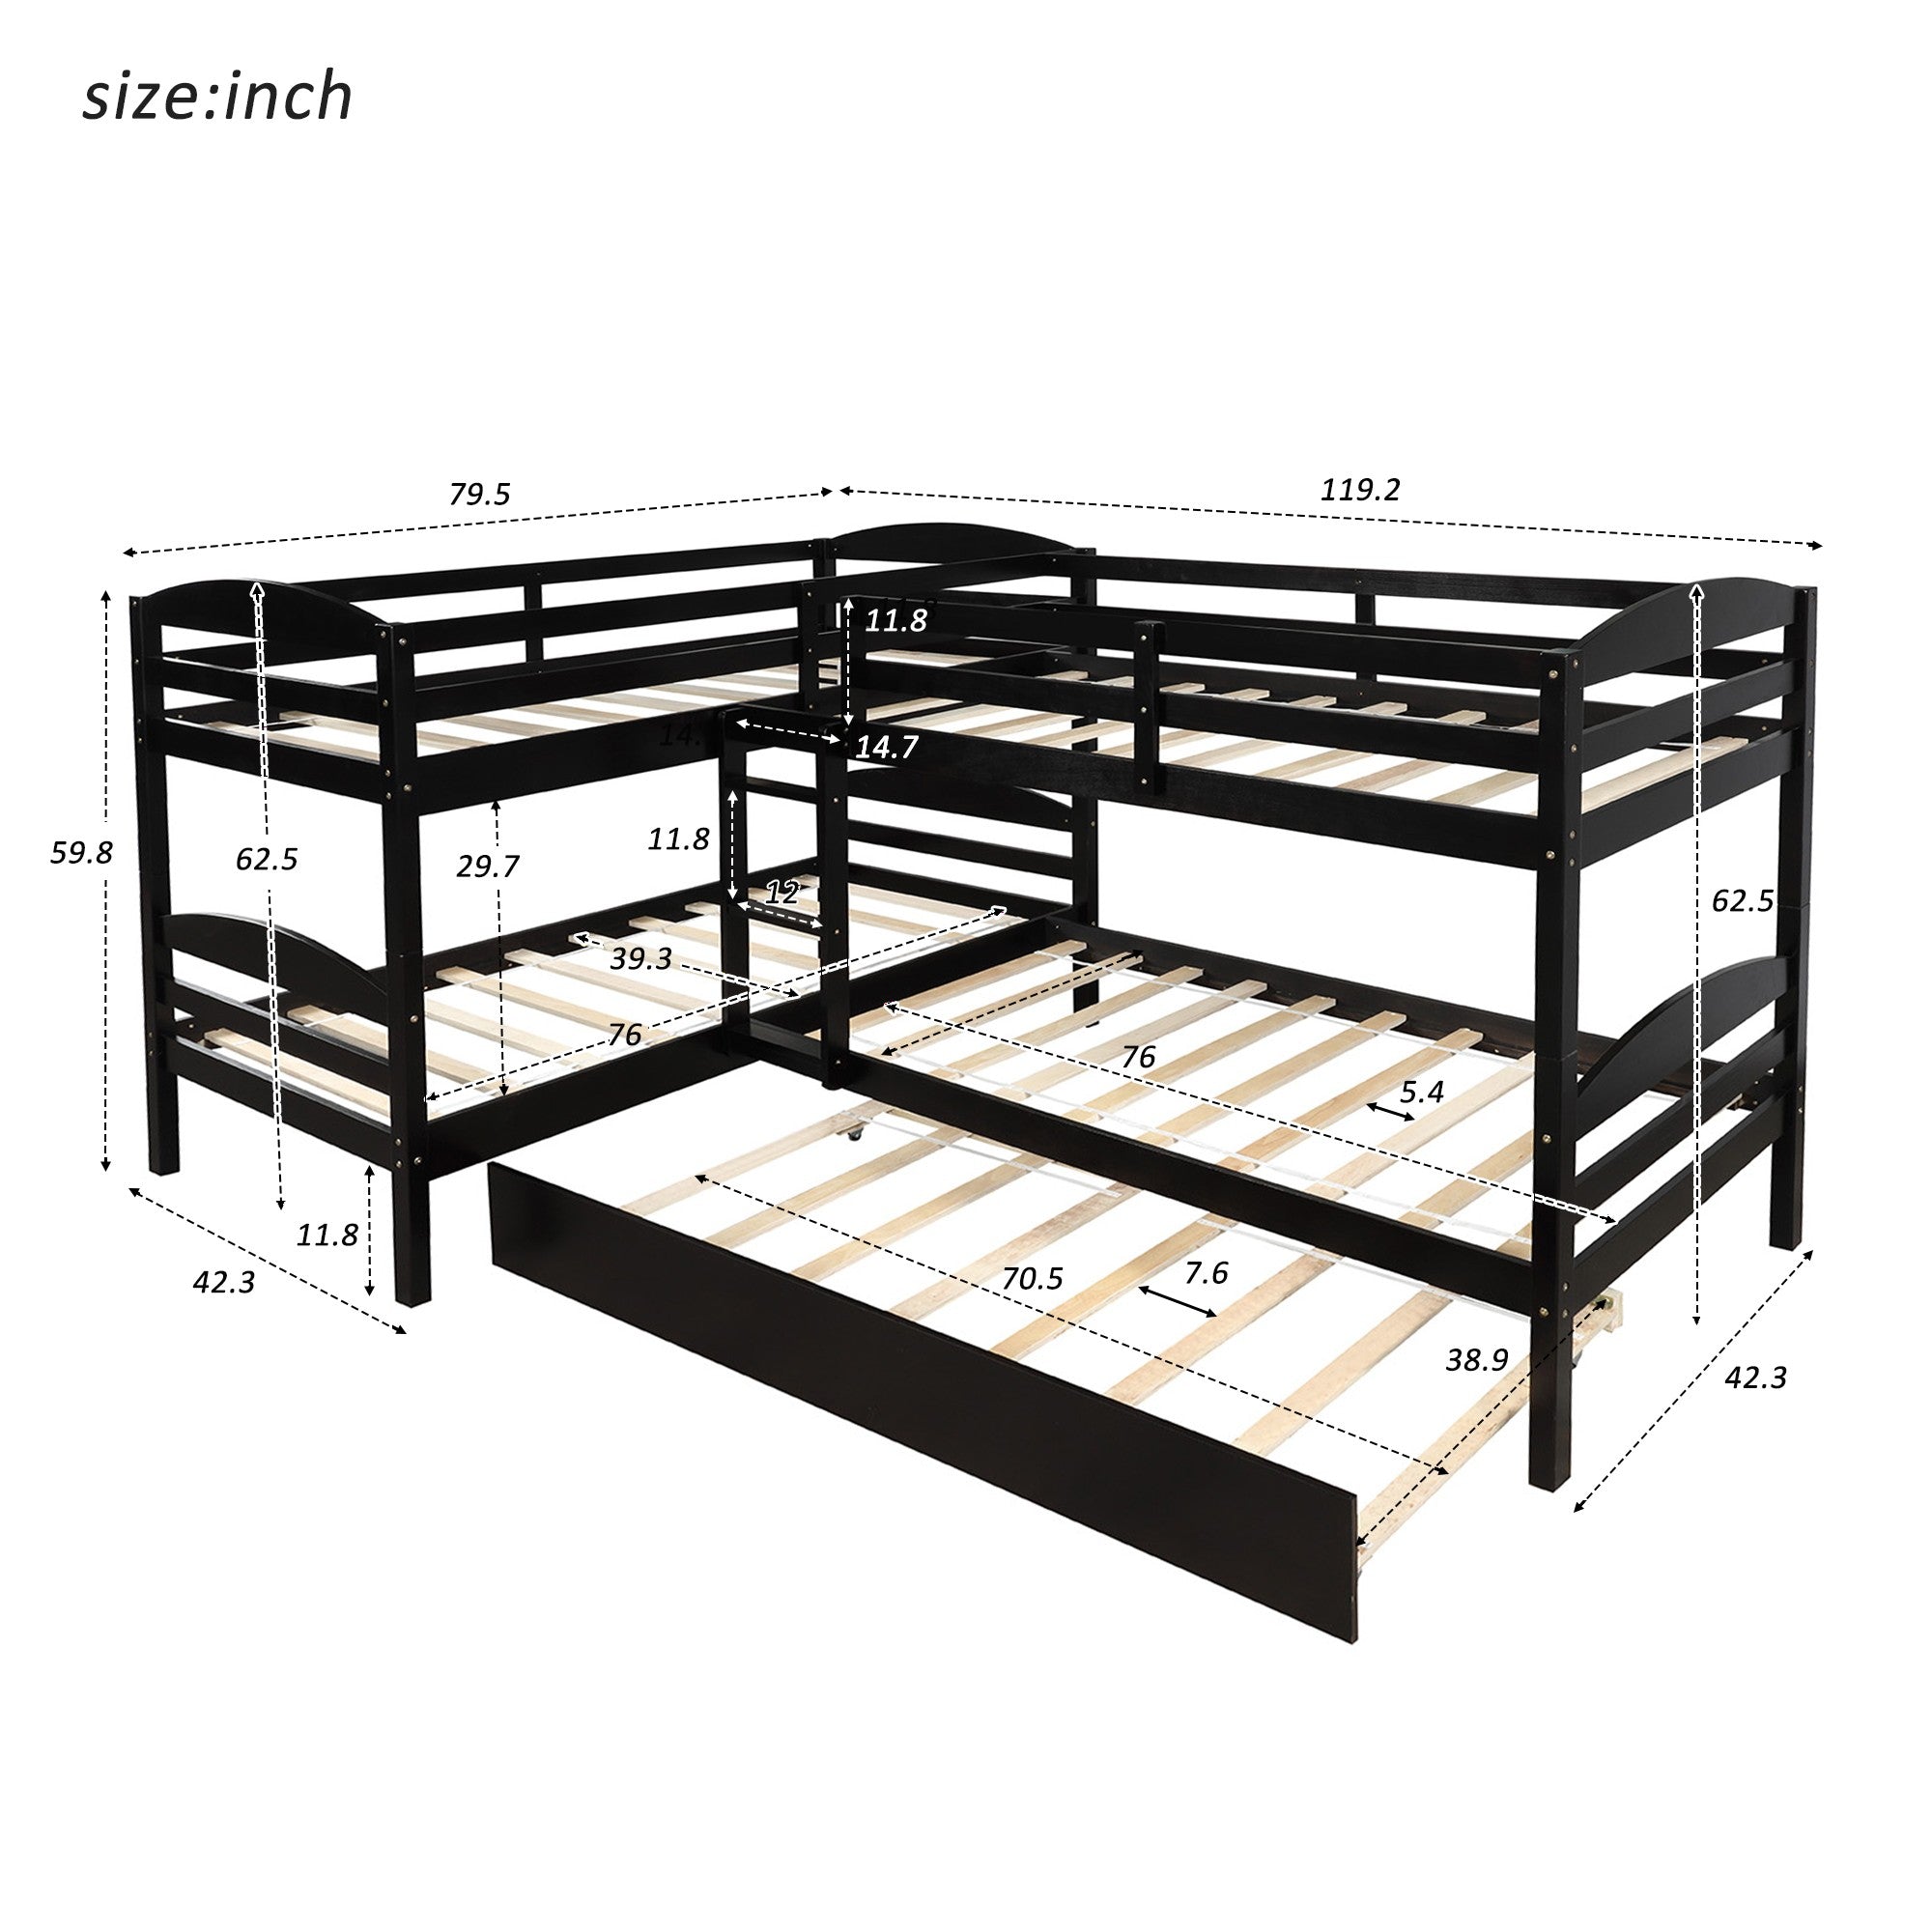 Espresso Twin Contemporary Manufactured Wood and Solid Wood Bunk Bed